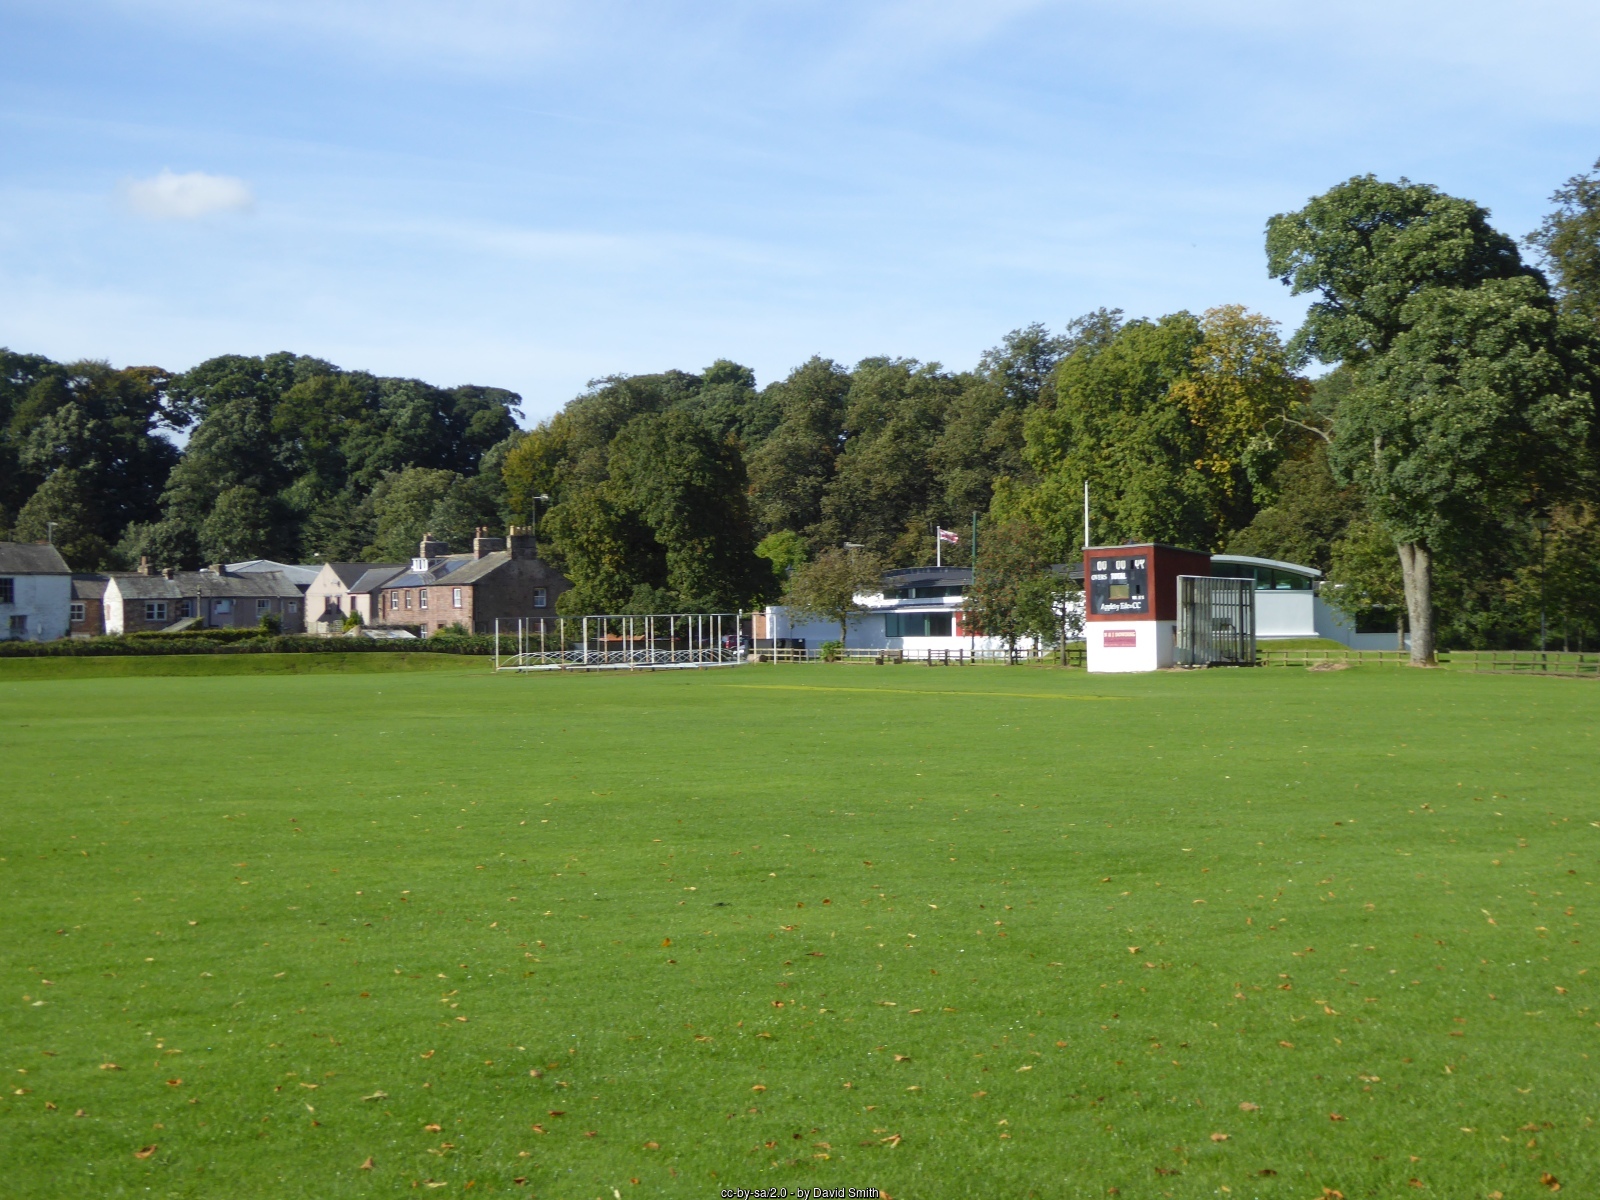 The cricket pitch at the Appleby leisure centre